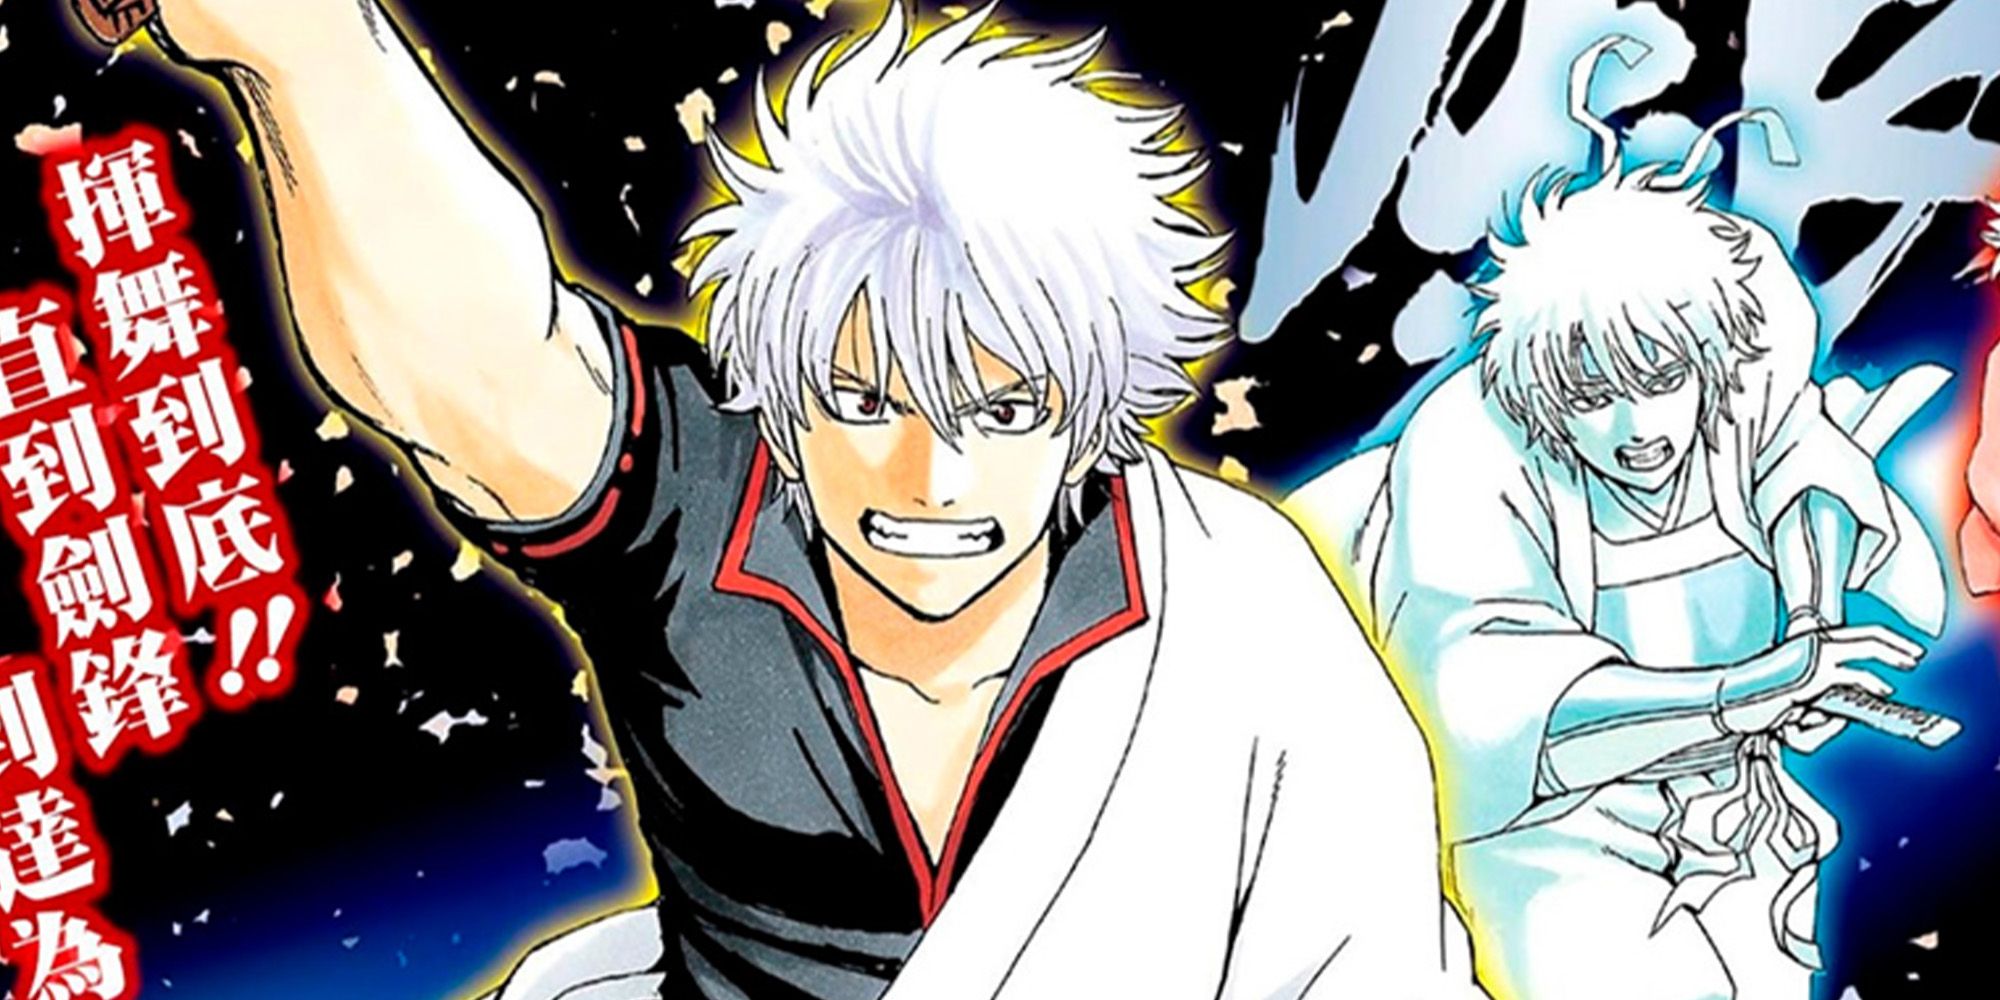 Gintoki holding his famous wooden sword